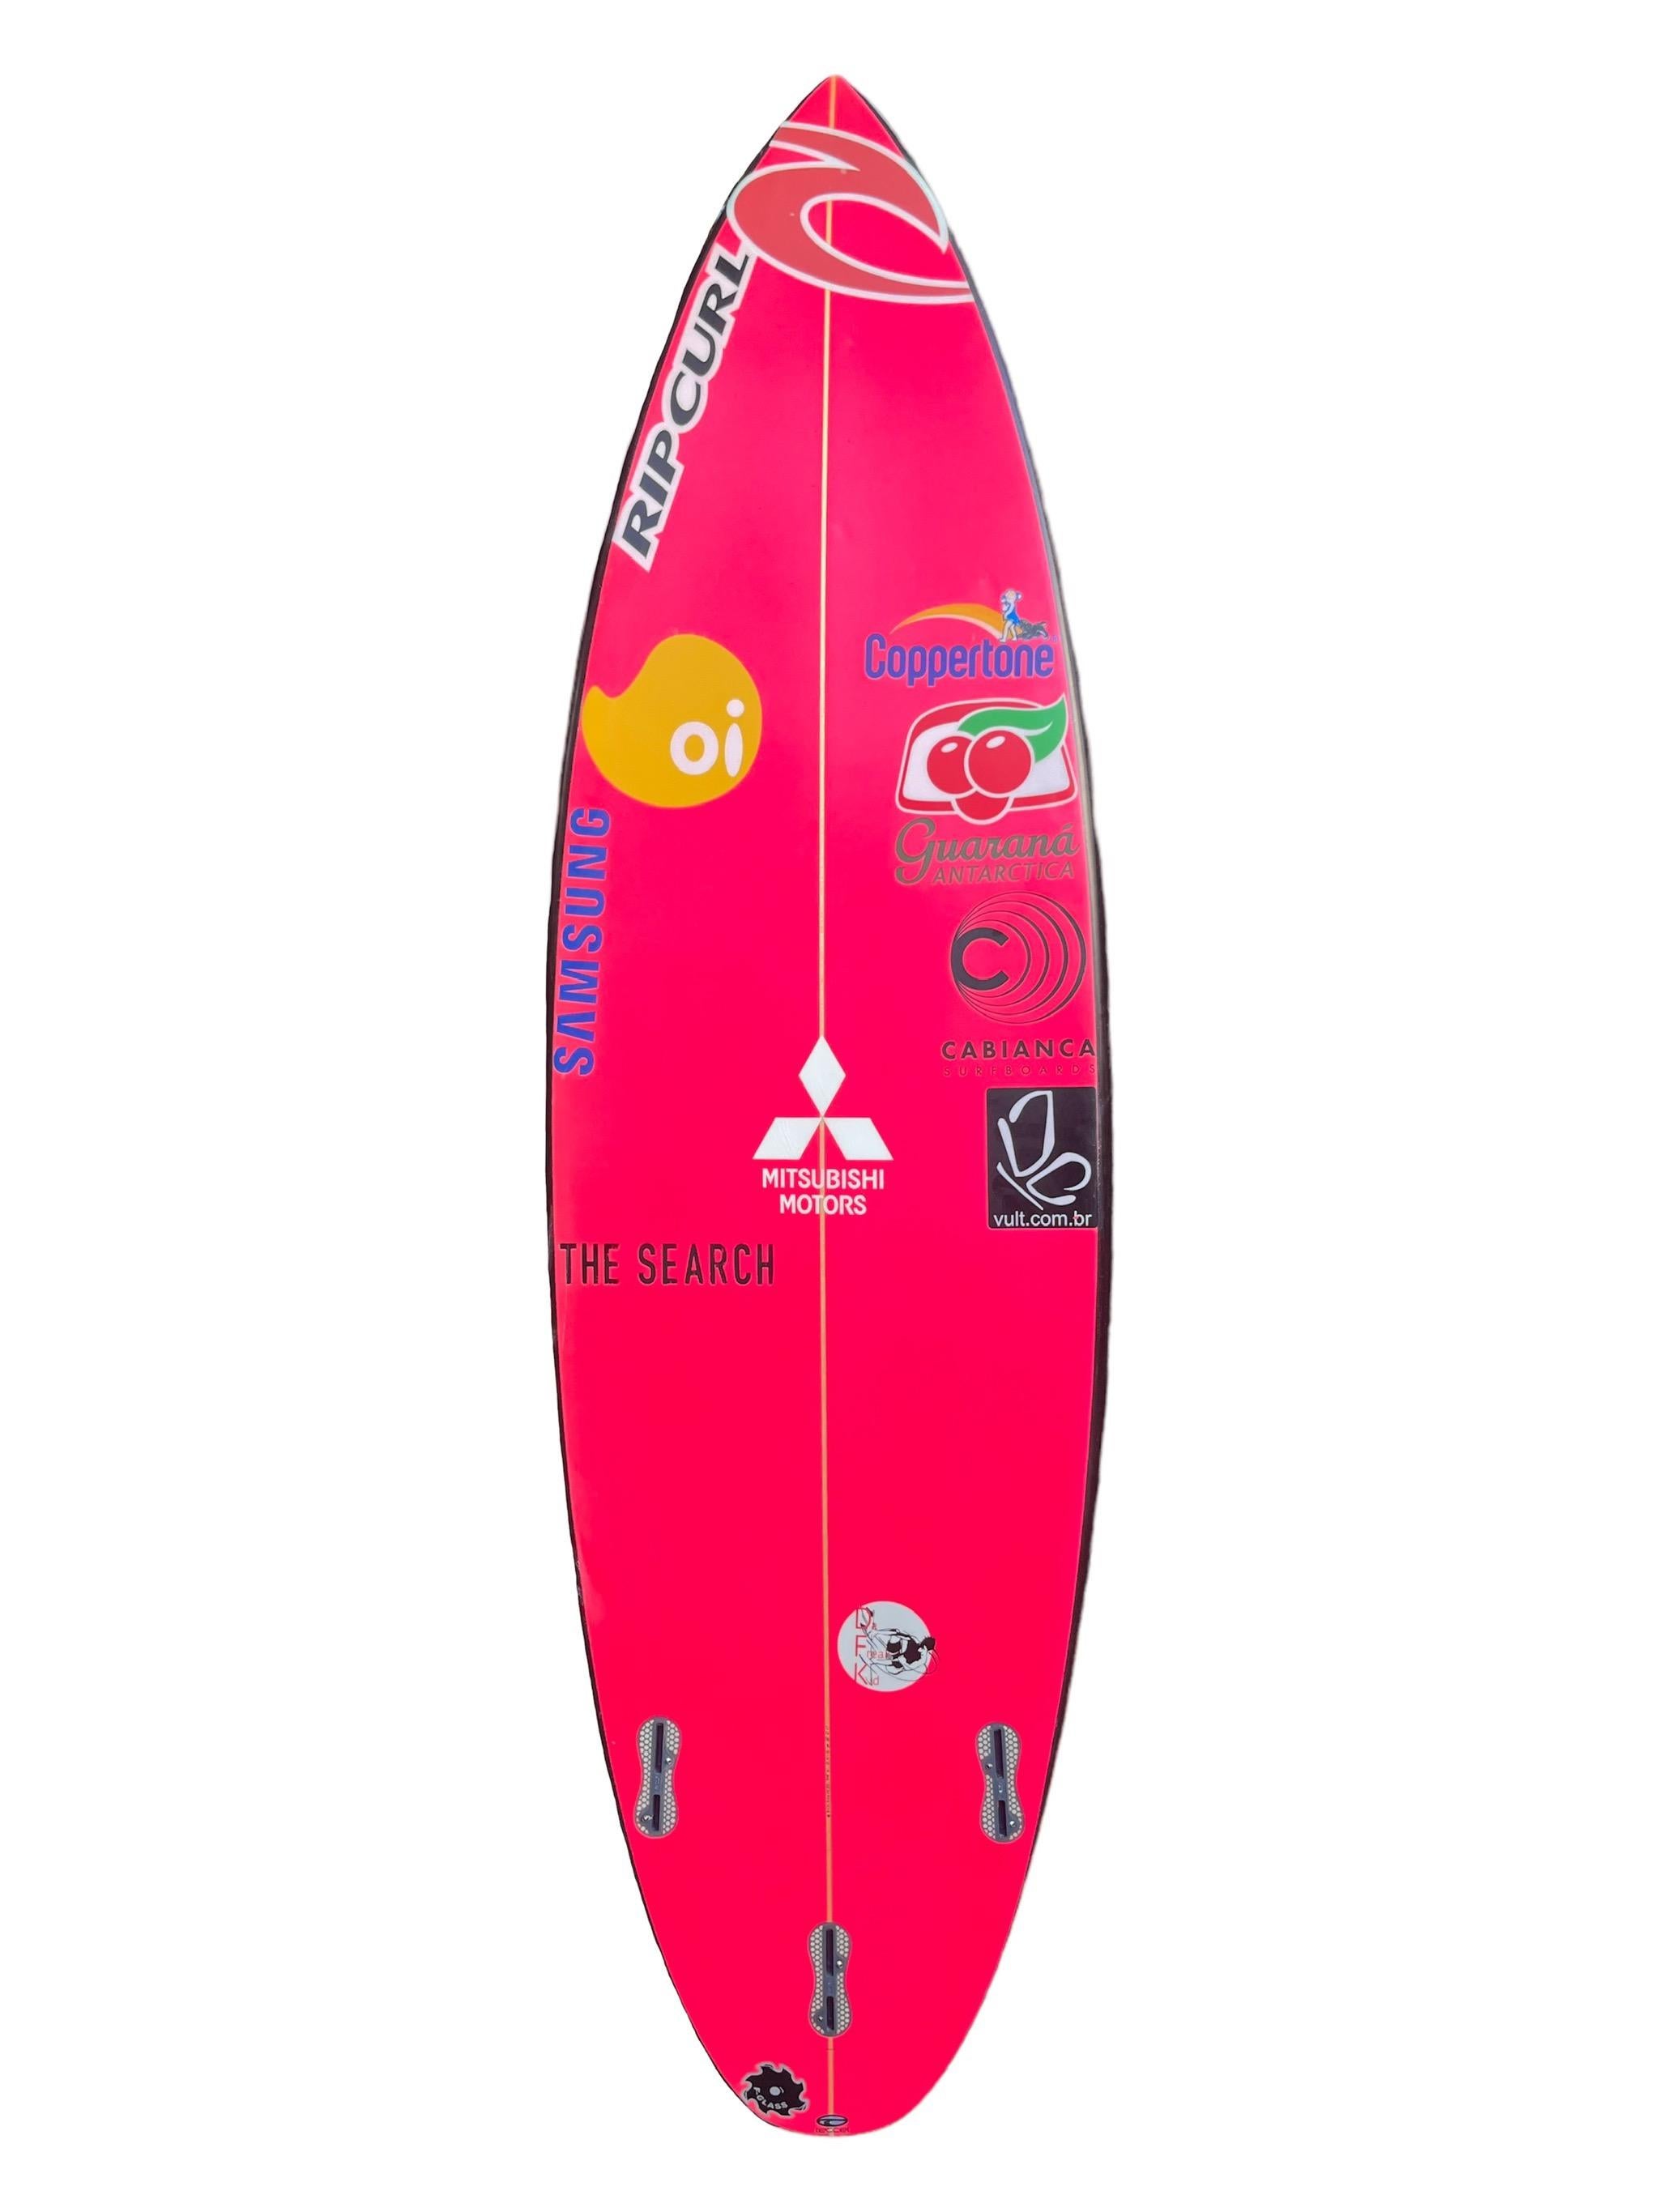 3X World Champion, Gabriel Medina’s personal surfboard. Medina is the 2014/2018/2021 WSL World Champion of Surfing. Image of Gabriel Medina performing an aerial maneuver on a similar surfboard taped to the nose. Ride or display this prized world